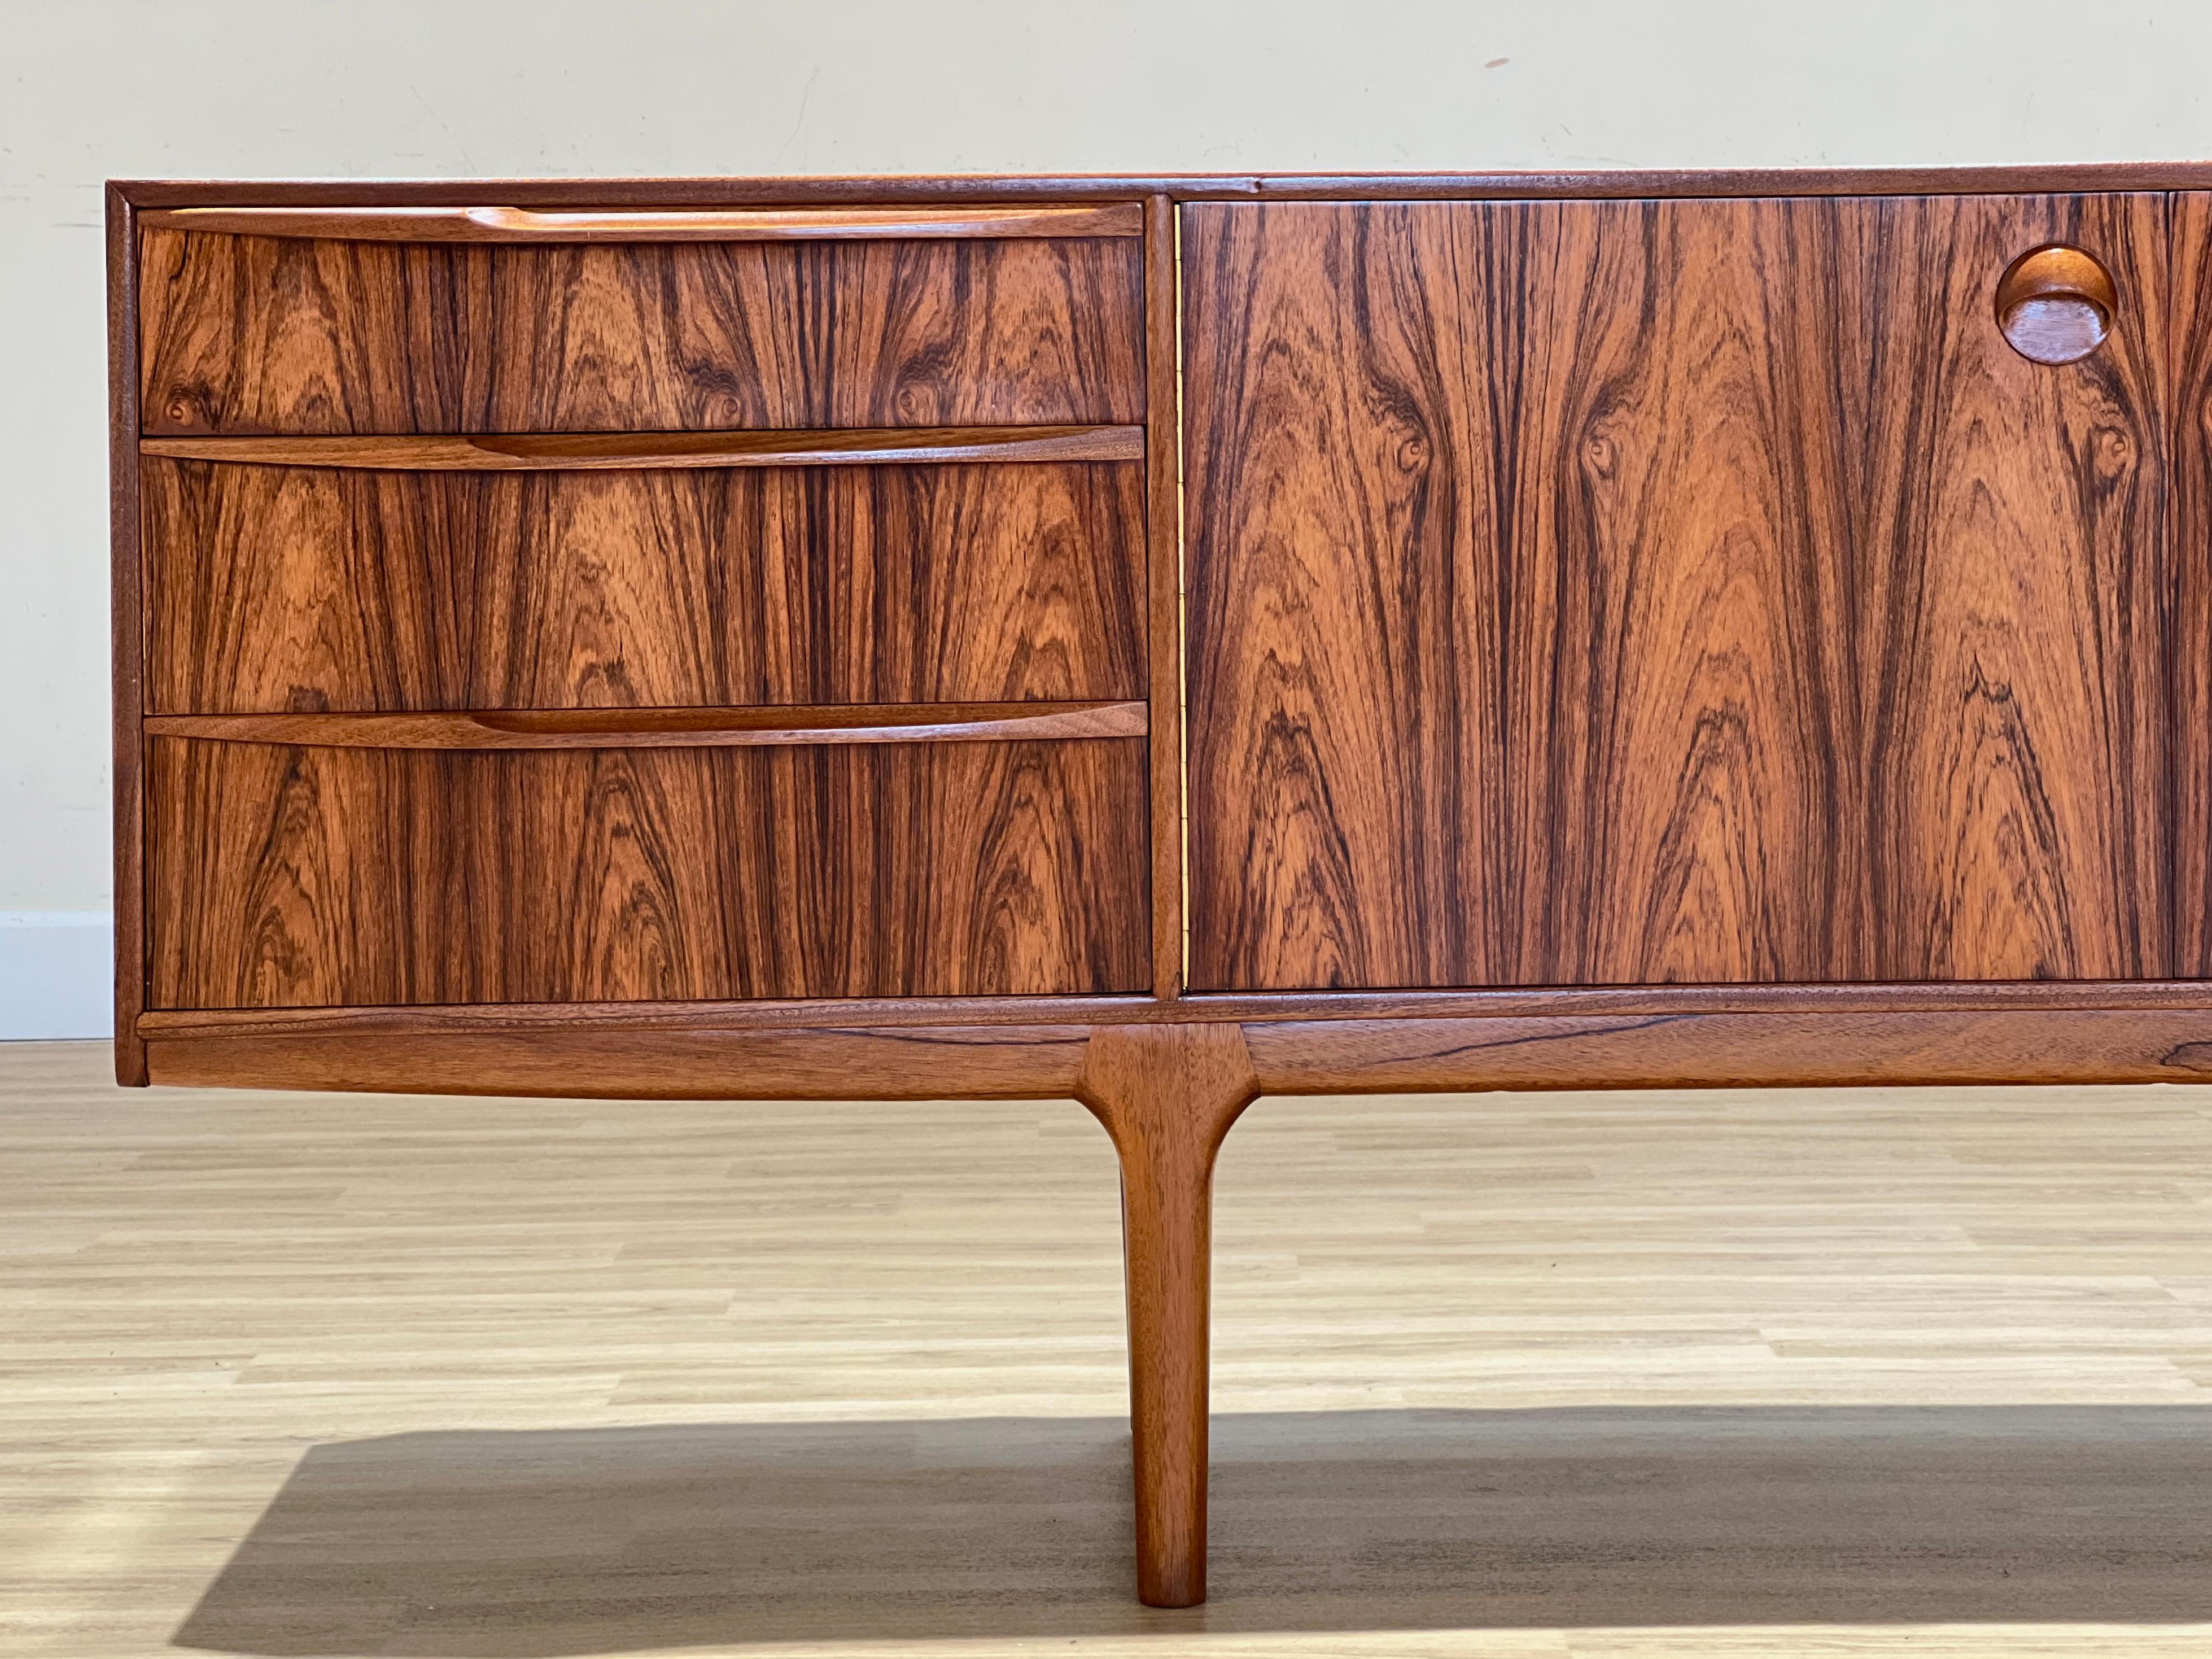 Tom Robertson designed this sideboard for its collection Dunfermline in Scotland for the high-end cabinet maker A.H. McIntosh. The sideboard, handcrafted in stunning rosewood, has all its original features. This sideboard belongs to one of its